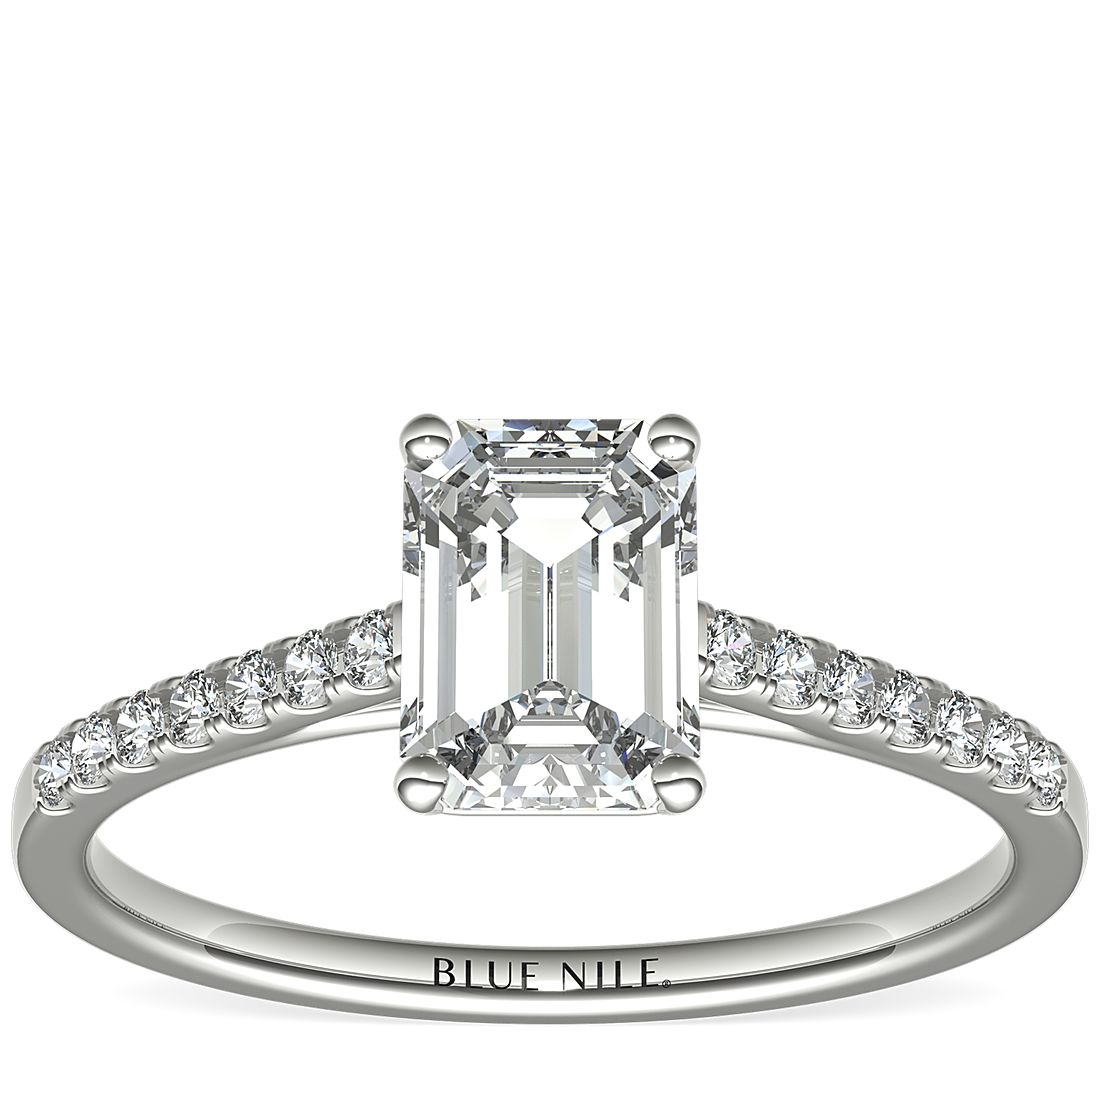 Pave Diamond Rings Setting What To Know Before Purchase The Diamond Pro,Lilac Bush Leaves